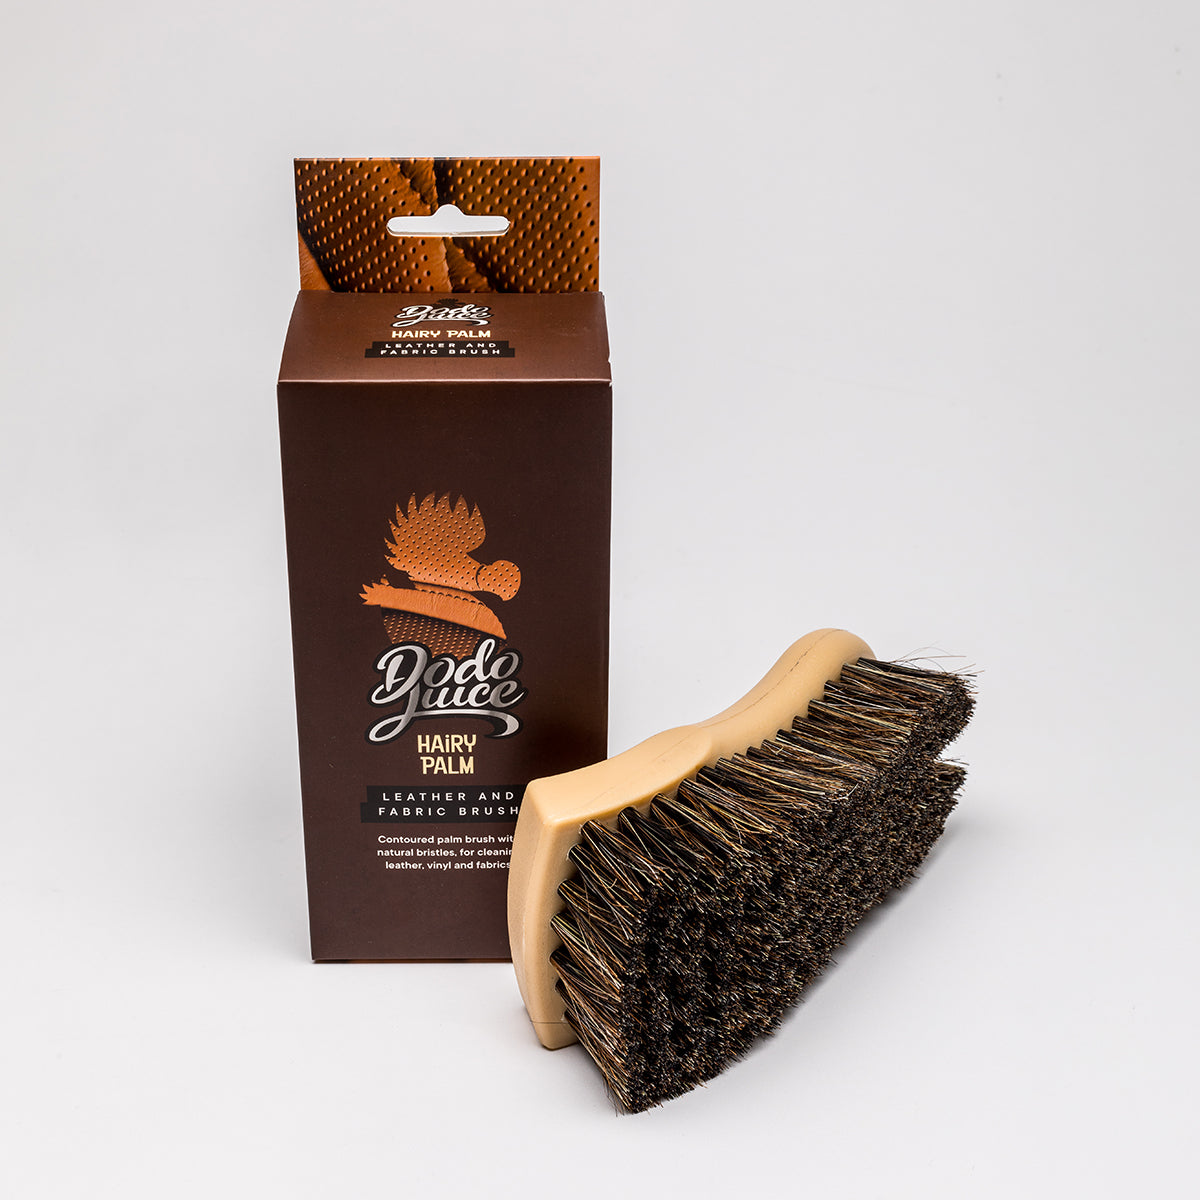 Hairy Palm - leather, vinyl and fabric/upholstery brush - natural bristles for gentler cleaning HS 9603909100